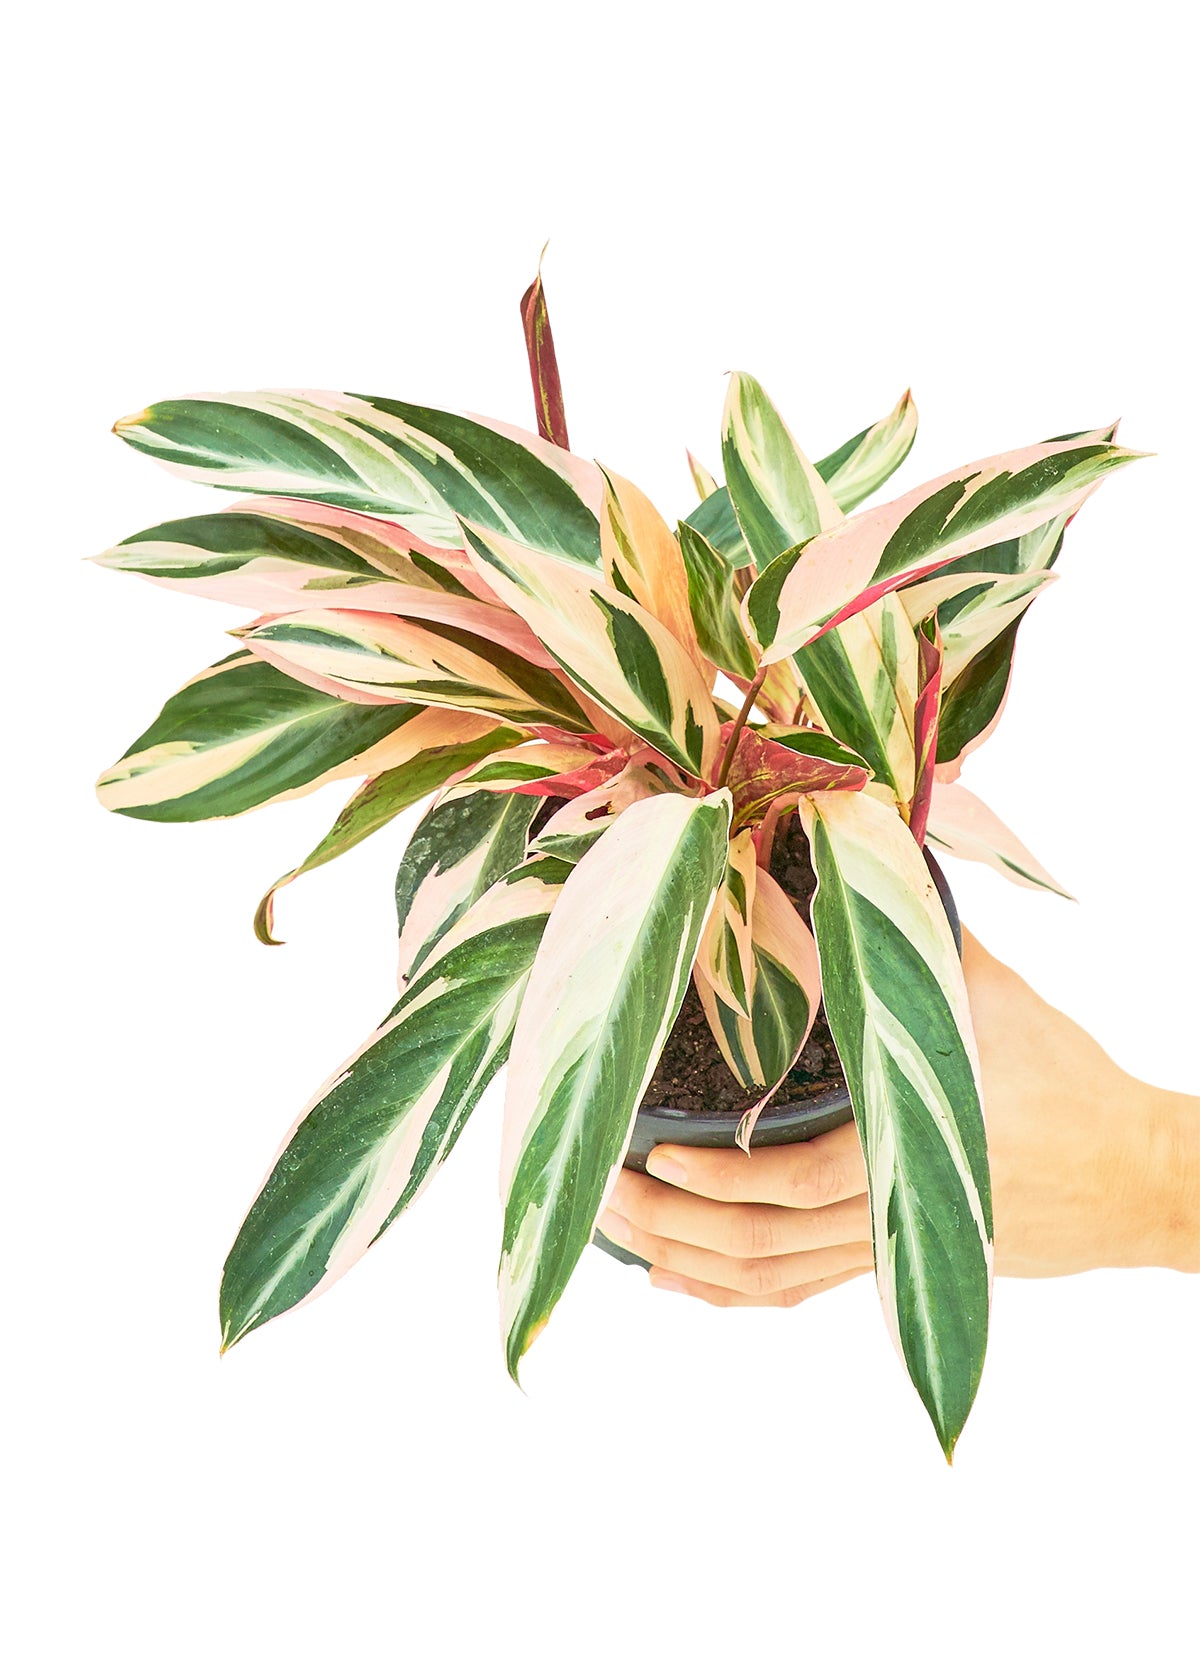 Medium size Stromanthe Triostar Plant in a growers pot with a white background with a hand holding the pot showing the top view